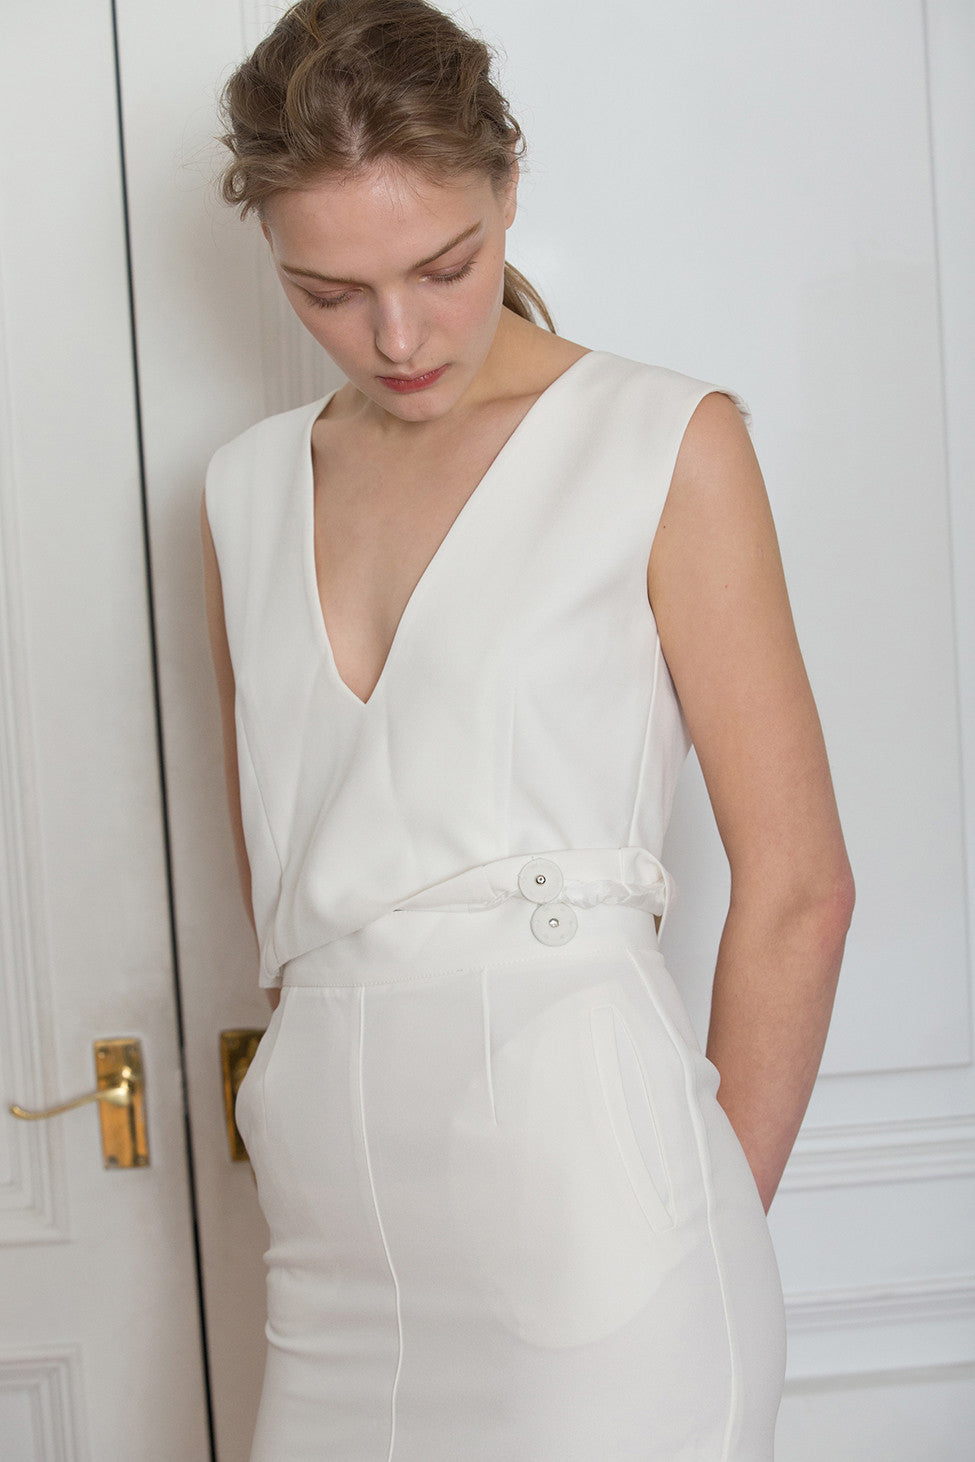 The Kole Dress in White, featuring deep V-neckline, sleeveless, open back in eyelet detailing with self-tie. Detachable snap button closure that can be worn separately as top and skirt. Skirt has a concealed zip fastening at the back.